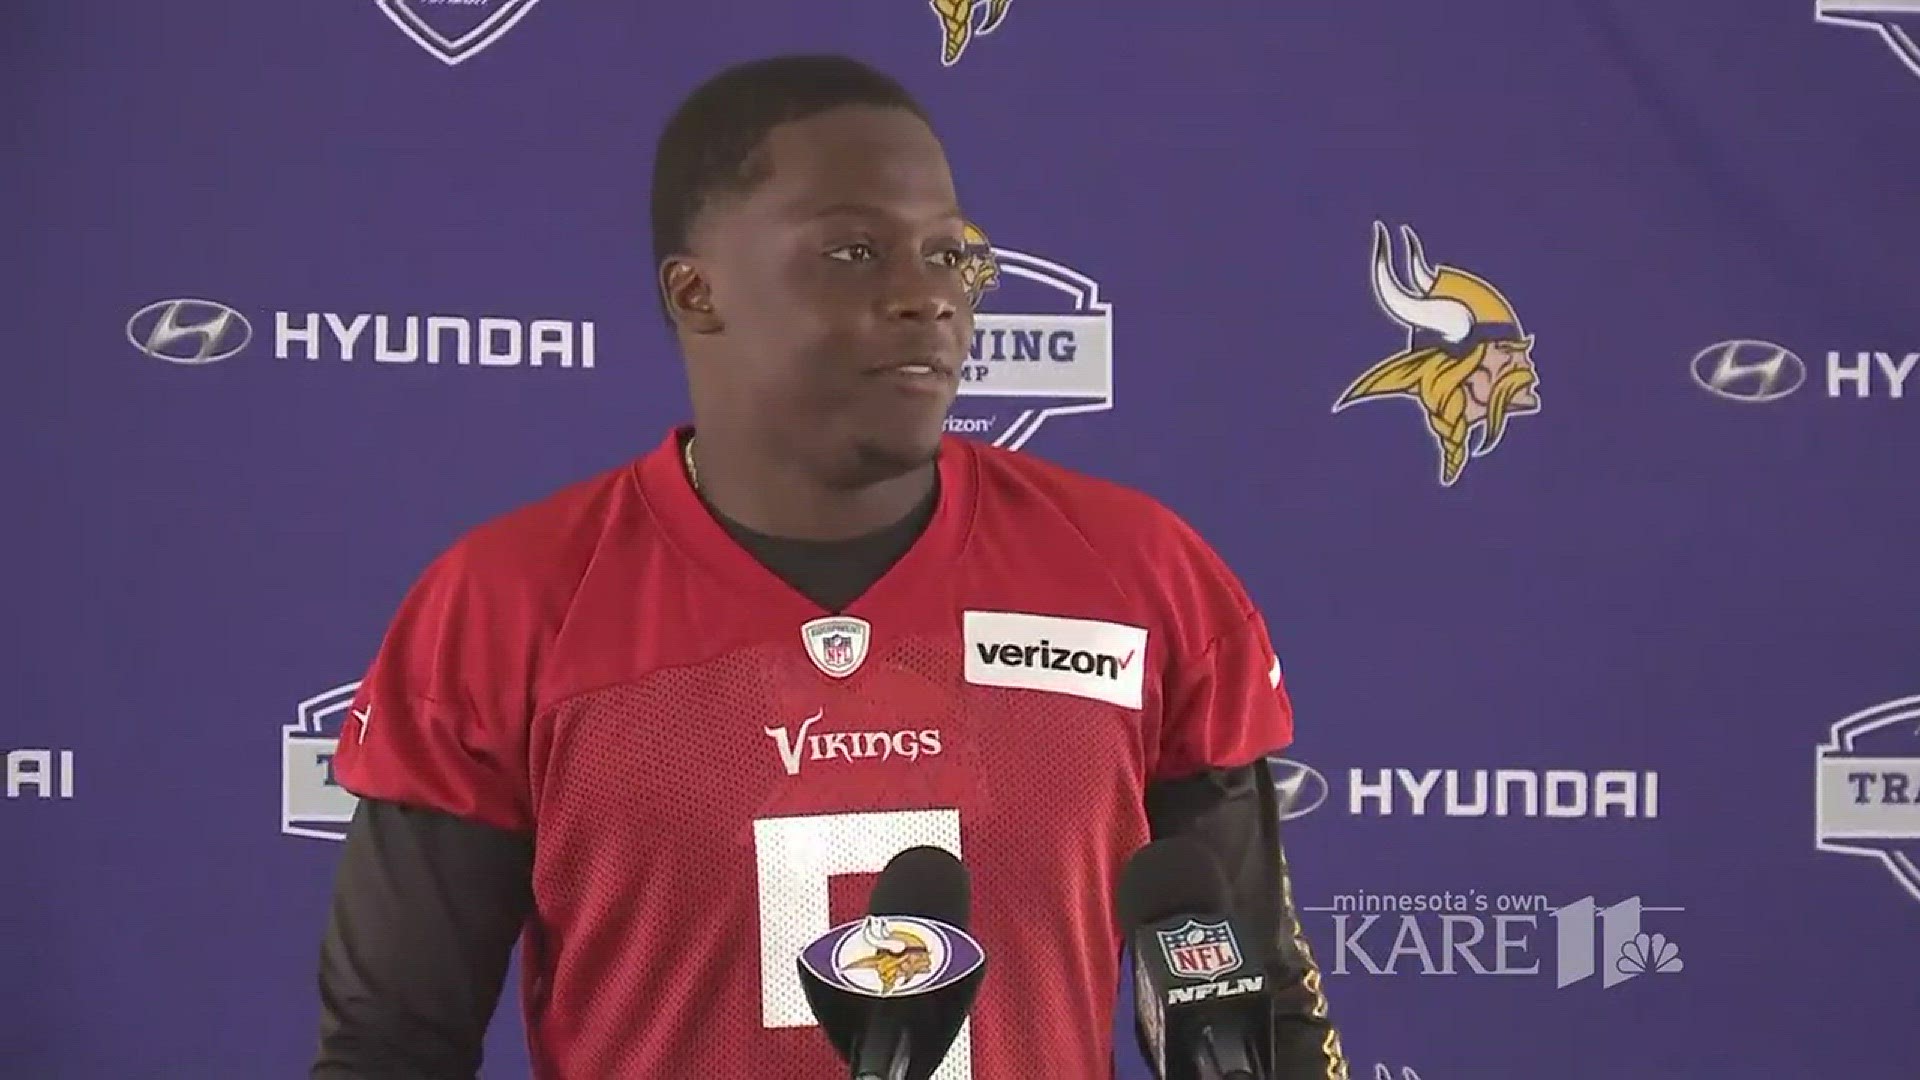 Teddy Bridgewater says he hasn't had any setbacks in his recovery from the massive injury to his left knee he suffered nearly a year ago in practice with the Minnesota Vikings.